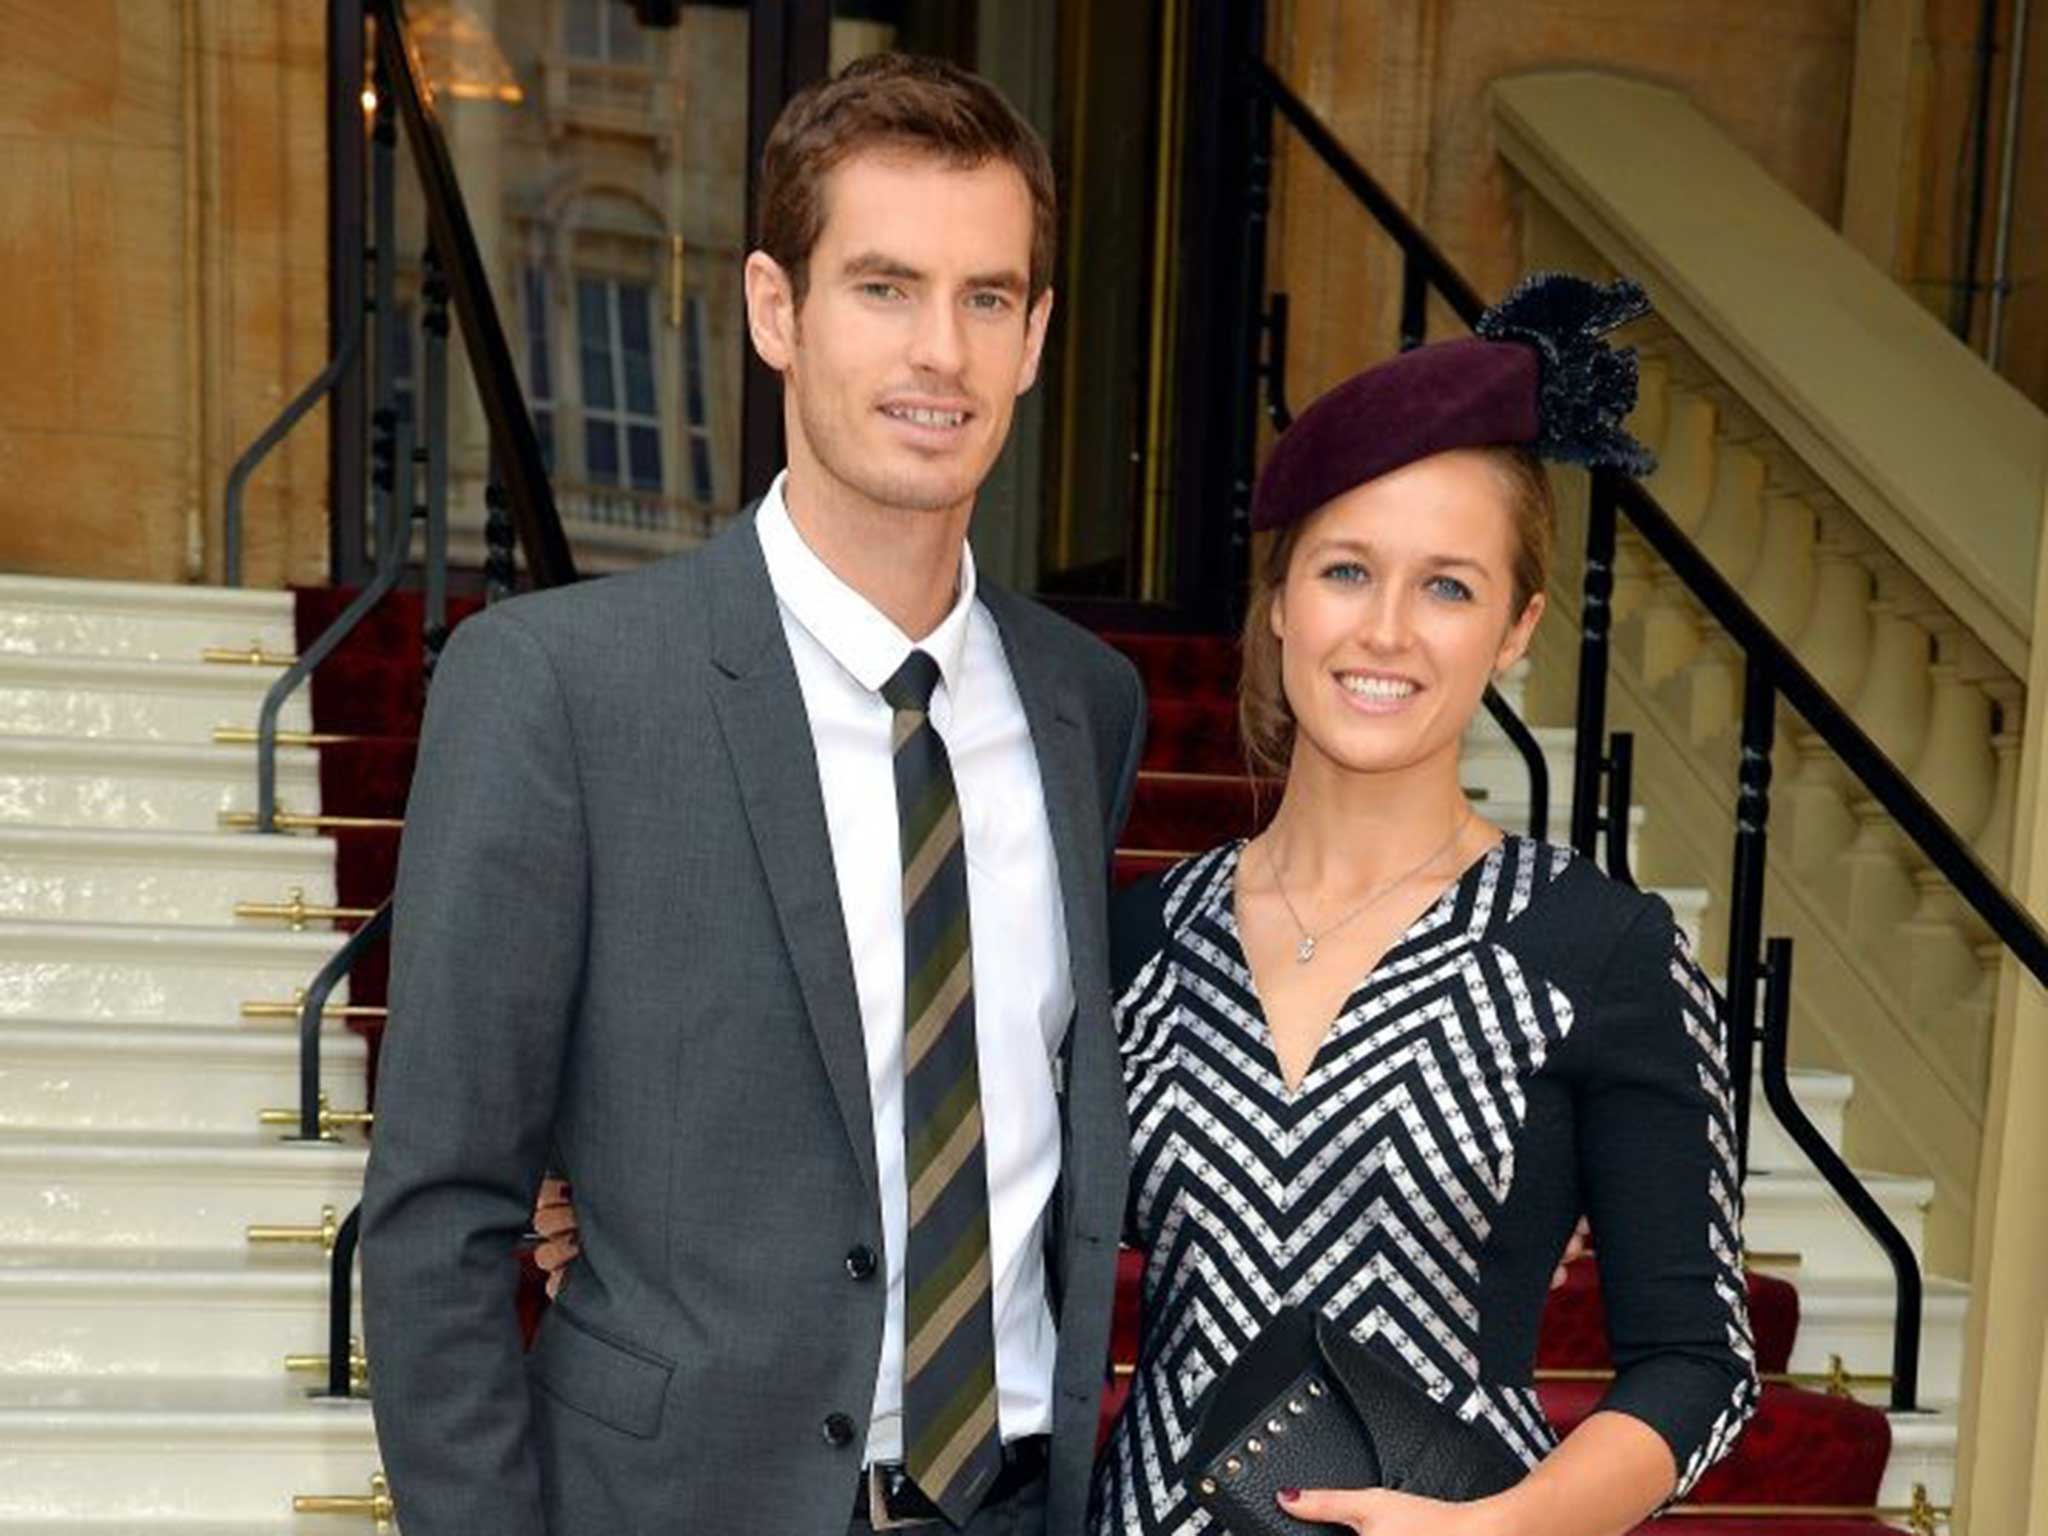 Murray and his bride-to-be Kim Sears, pictured at Buckingham Palace, have opted for a private ceremony